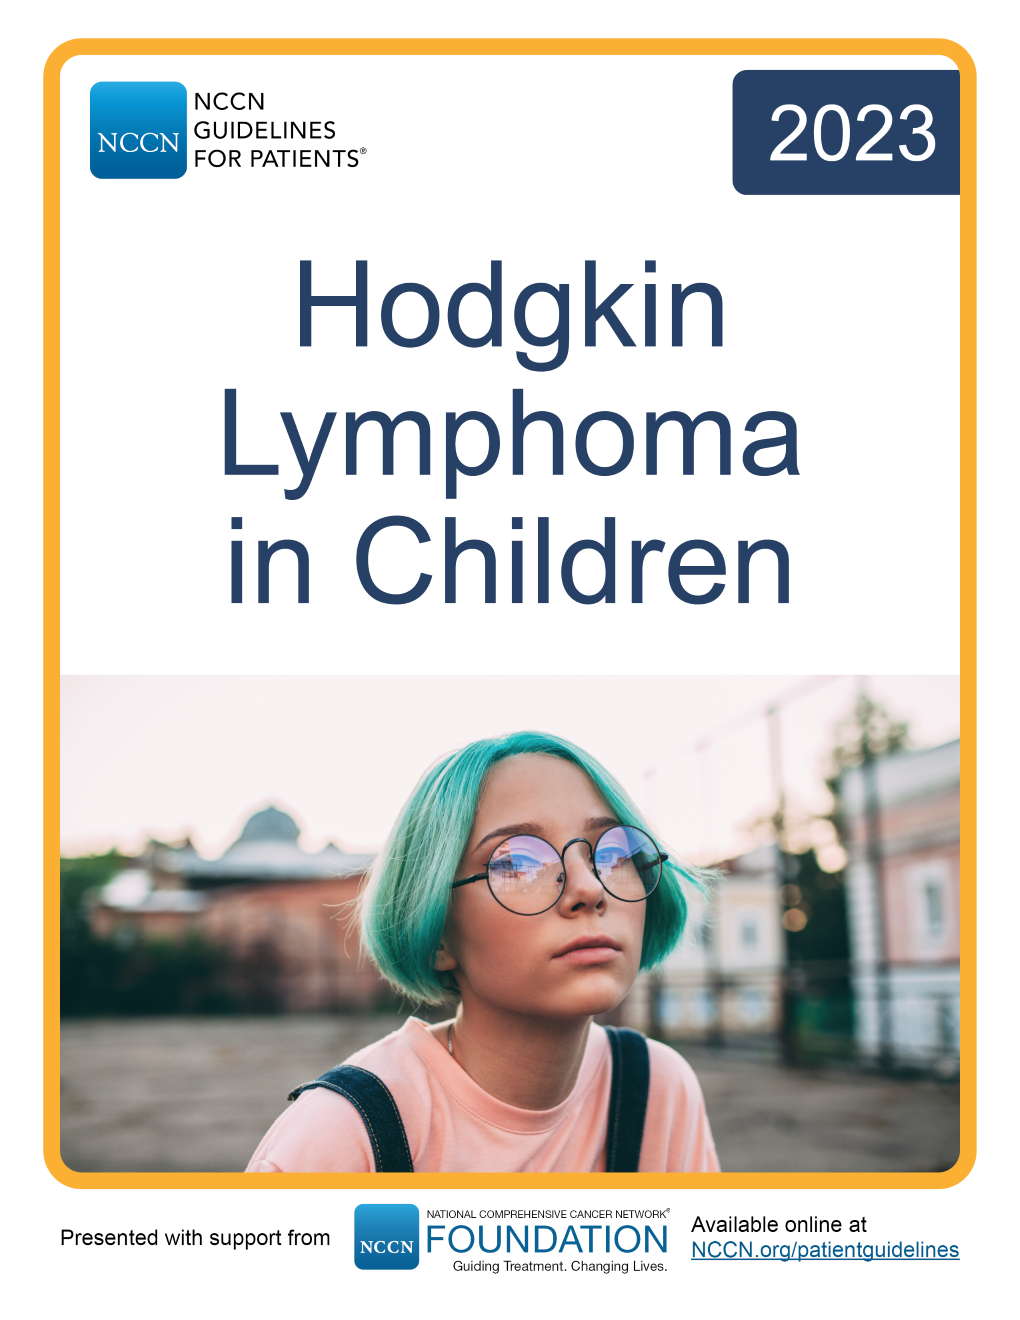 NCCN Guidelines for Patients: Hodgkin Lymphoma in Children